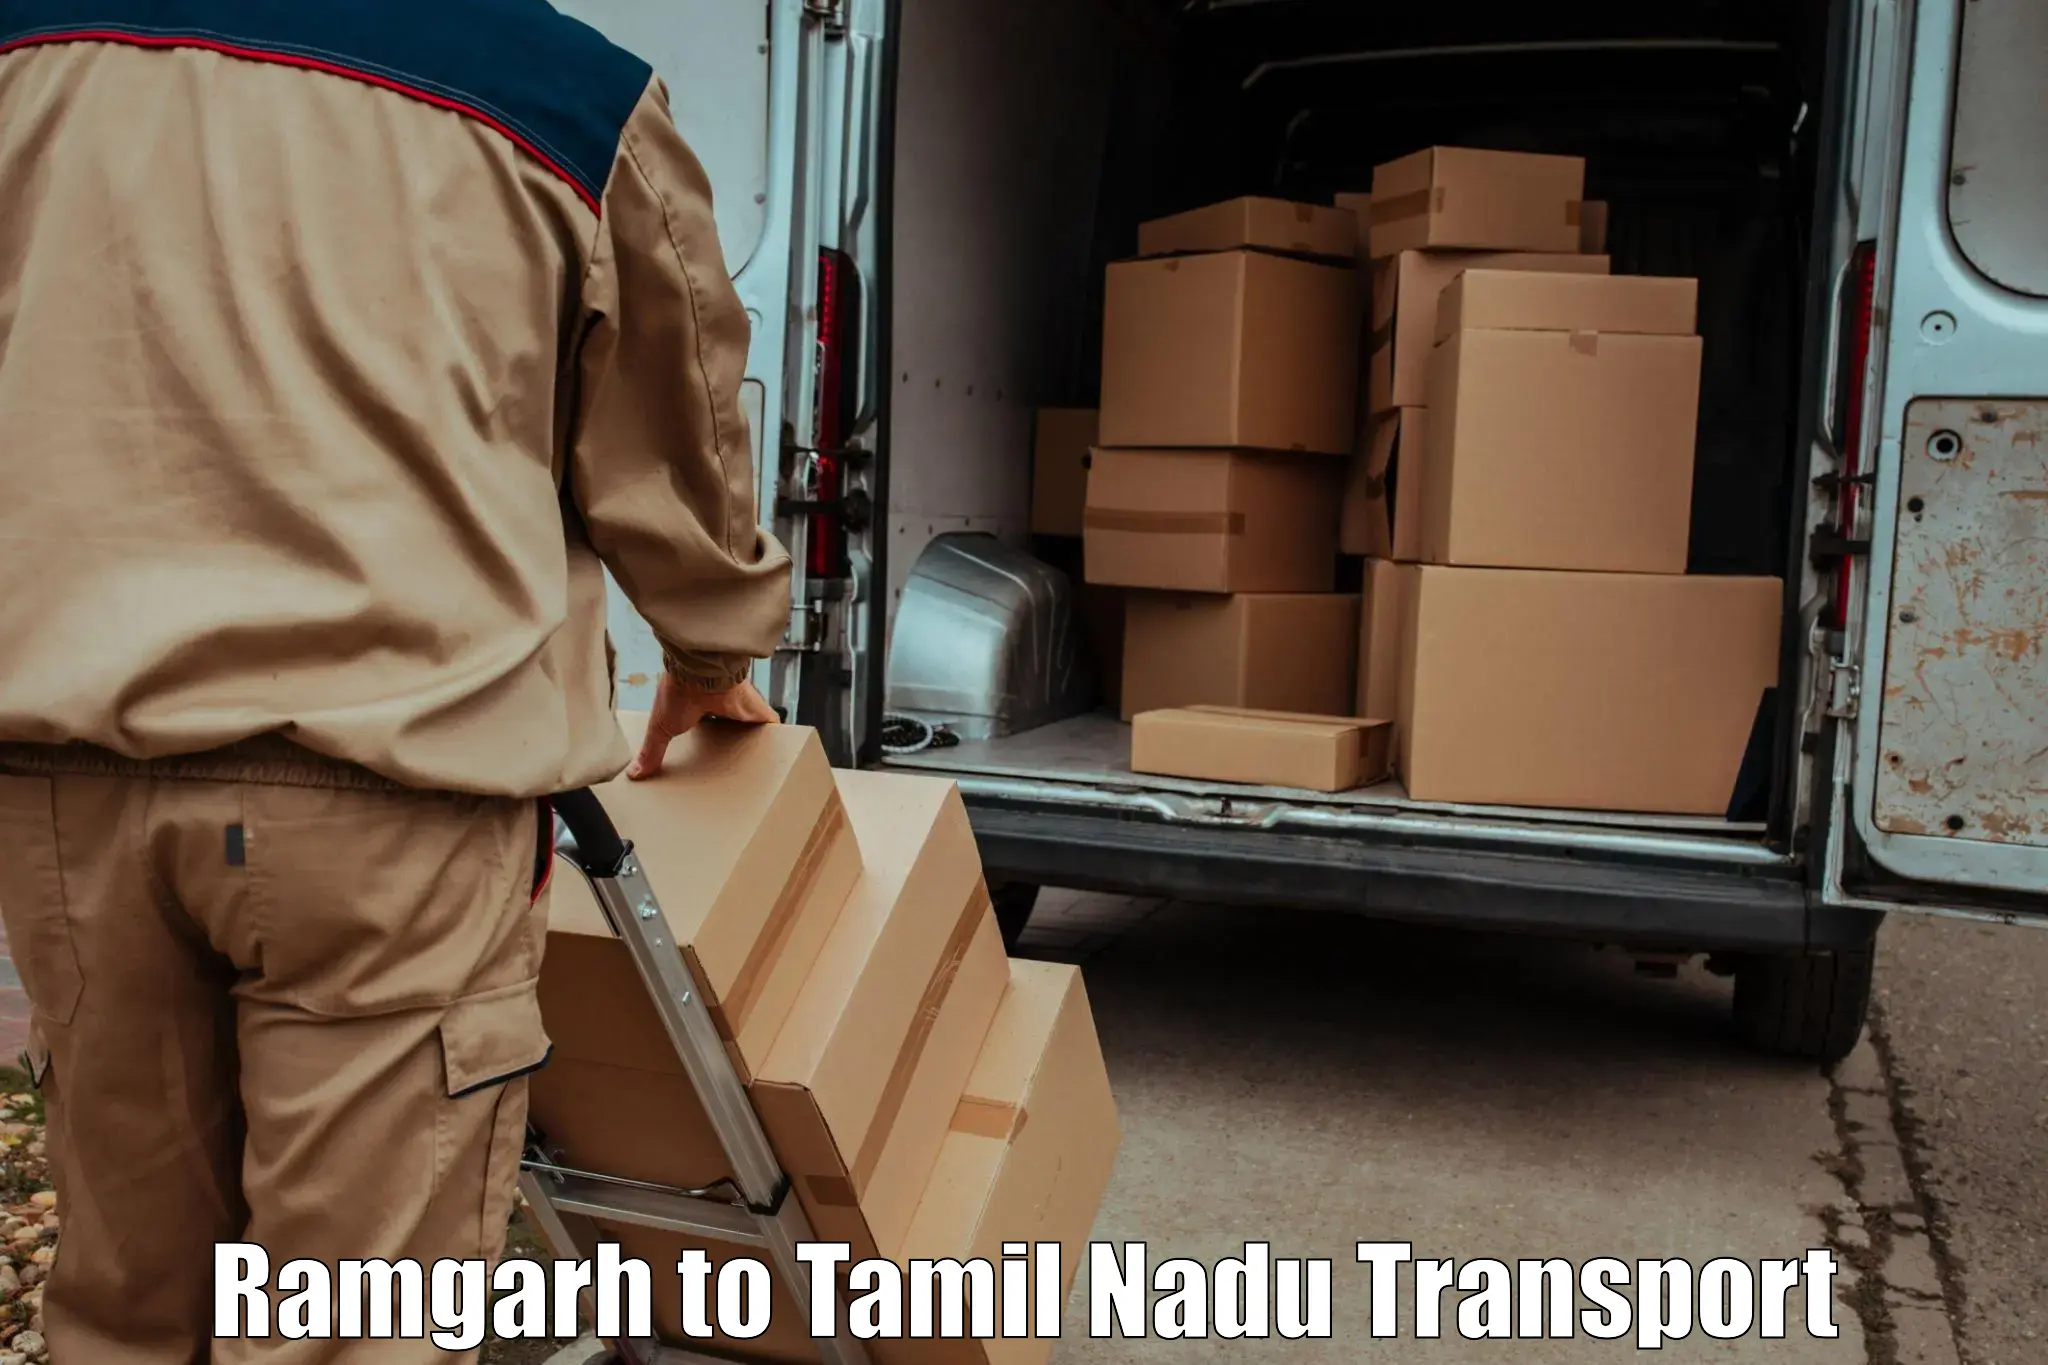 Transport bike from one state to another Ramgarh to Tamil Nadu